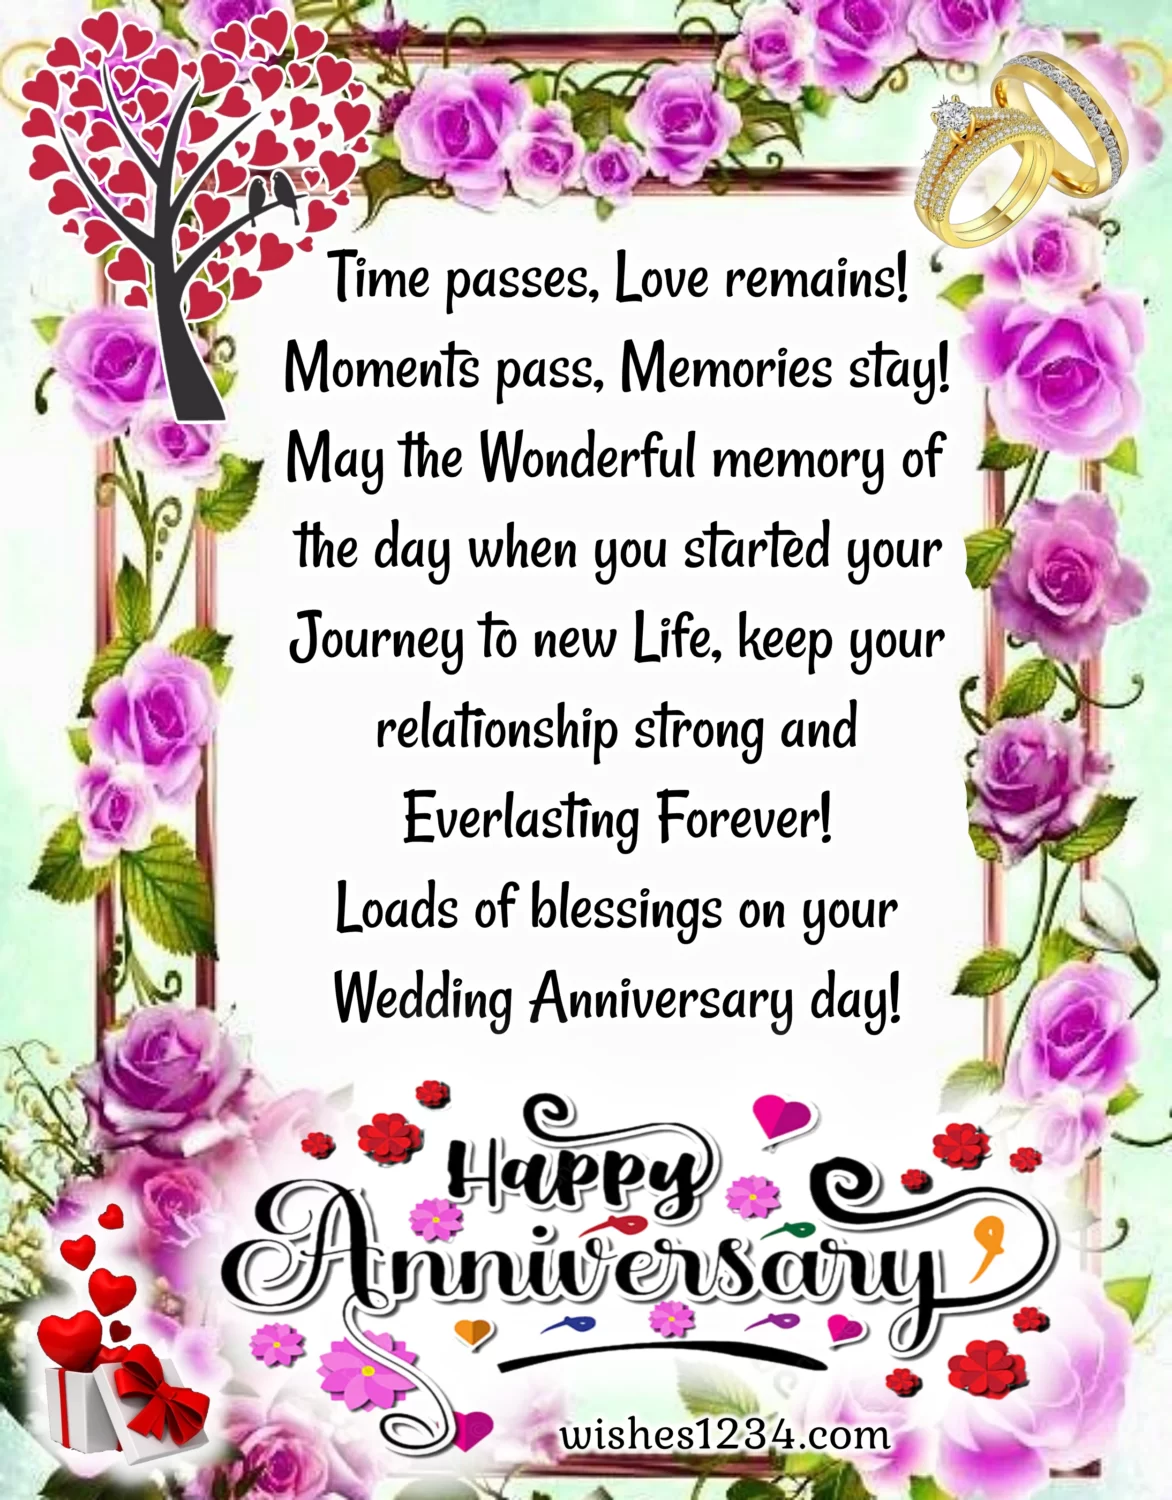 Wedding anniversary greeting with pink roses border, Anniversary Wishes.